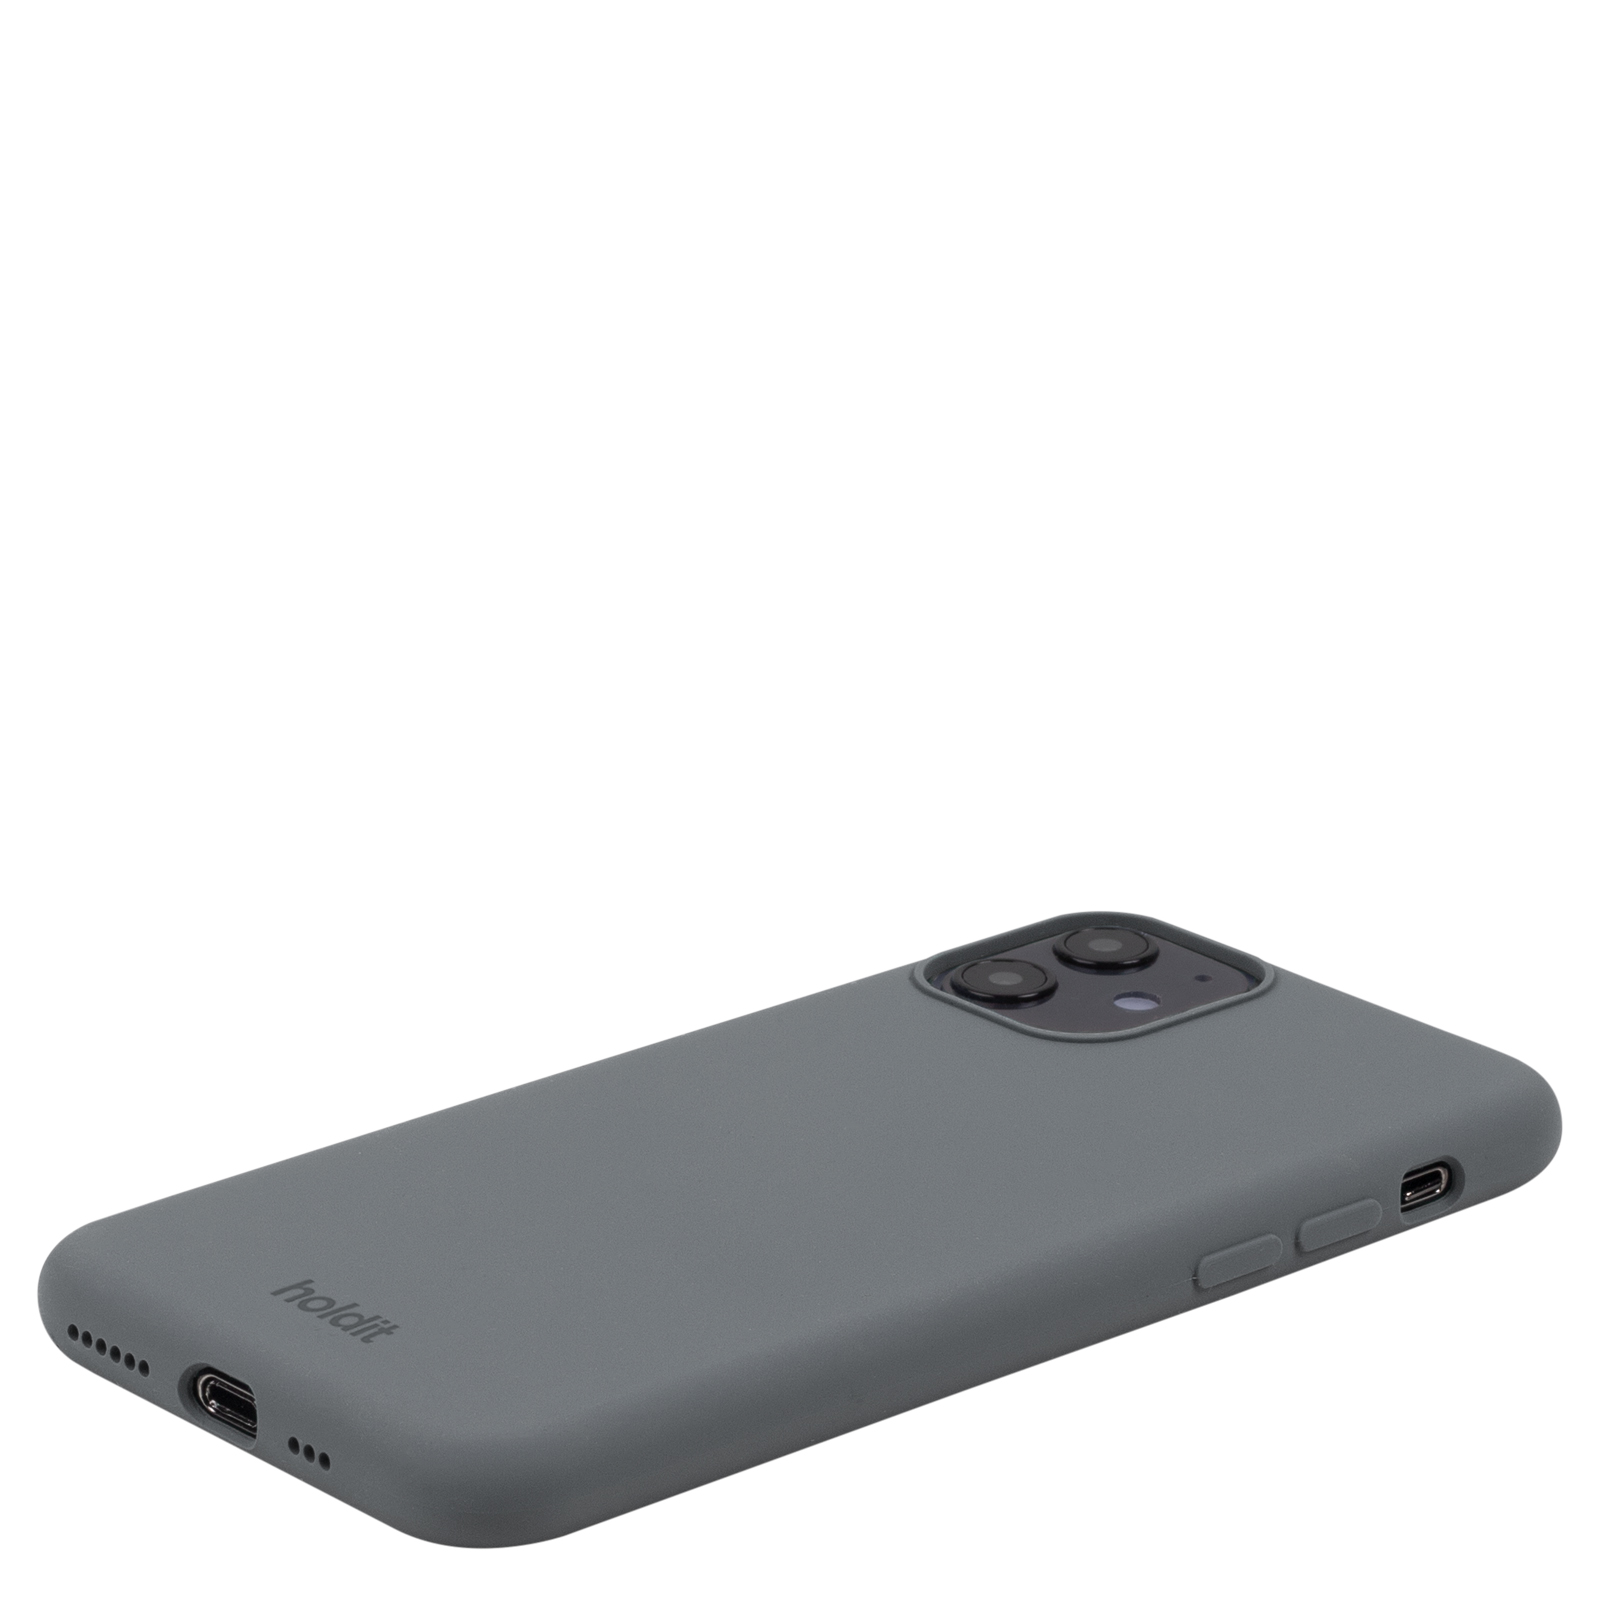 Гръб Holdit Silicone Case за  iPhone 11 - Space Gray